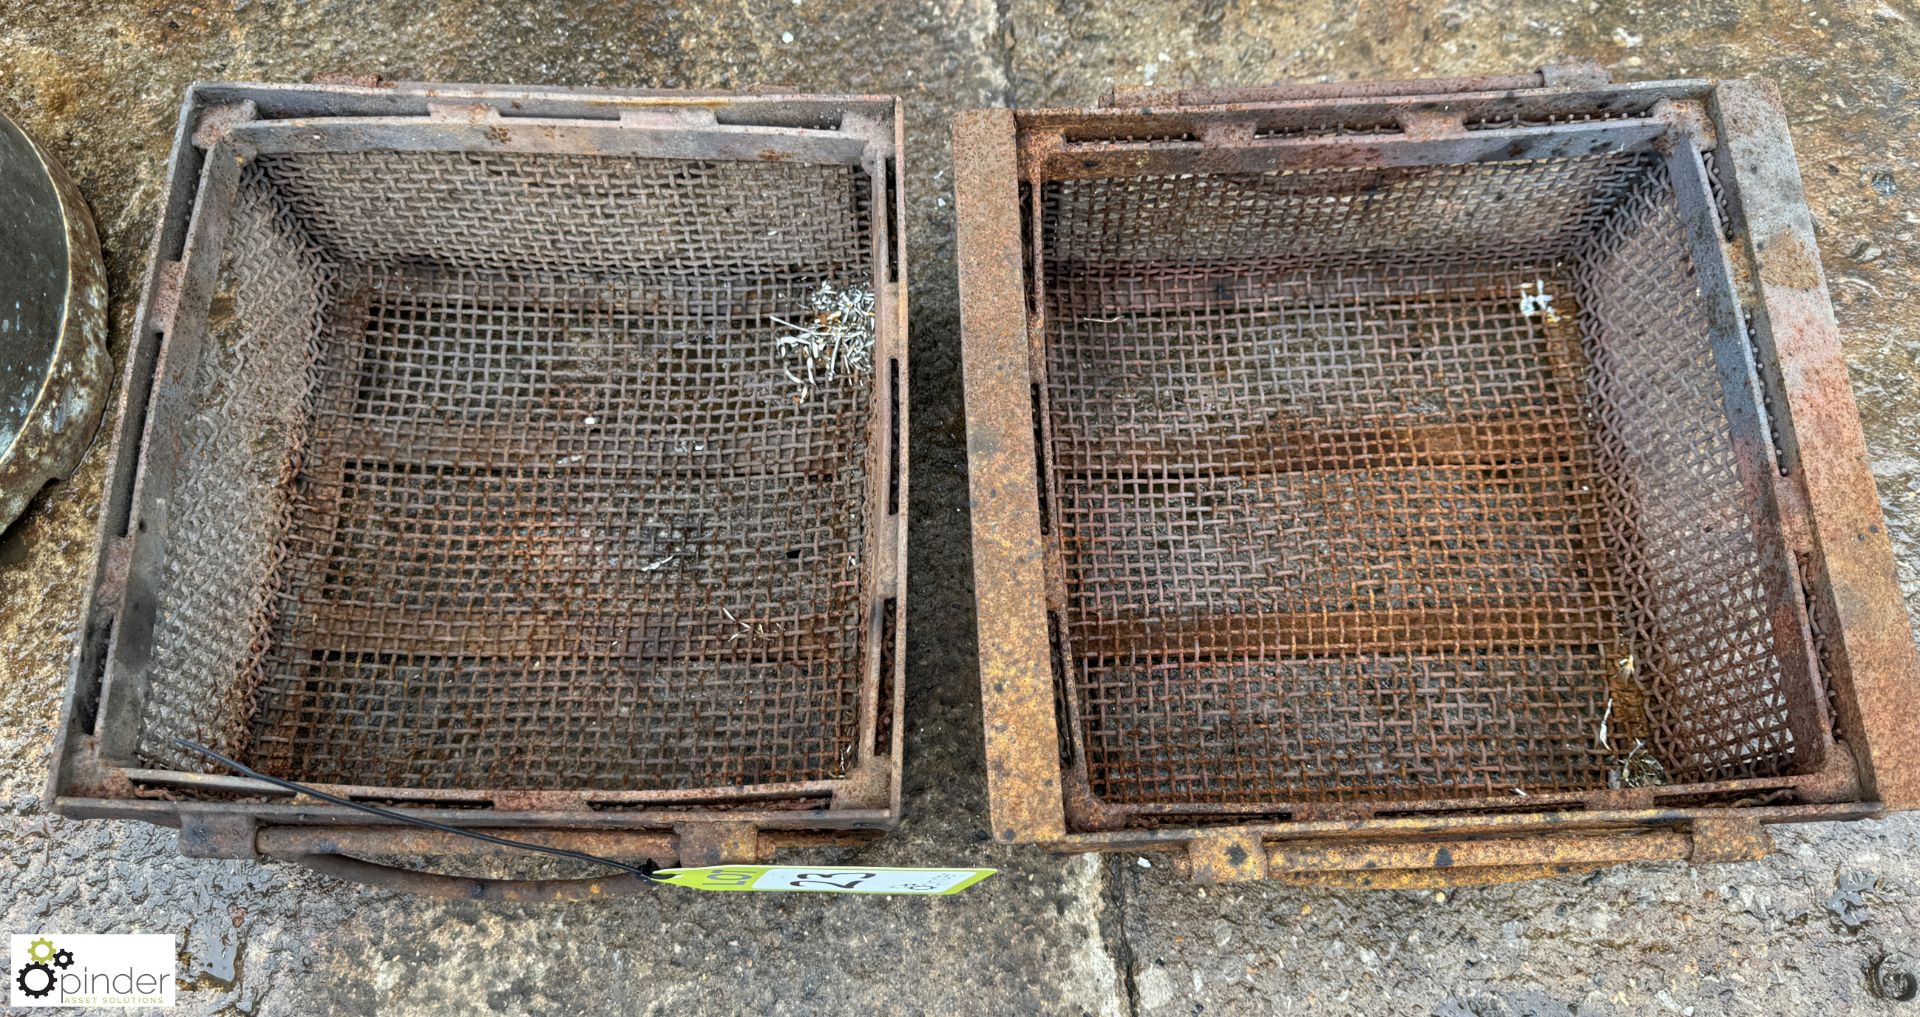 2 vintage metal Treatment Dipping Baskets, 300mm x 300mm x 130mm - Image 2 of 4